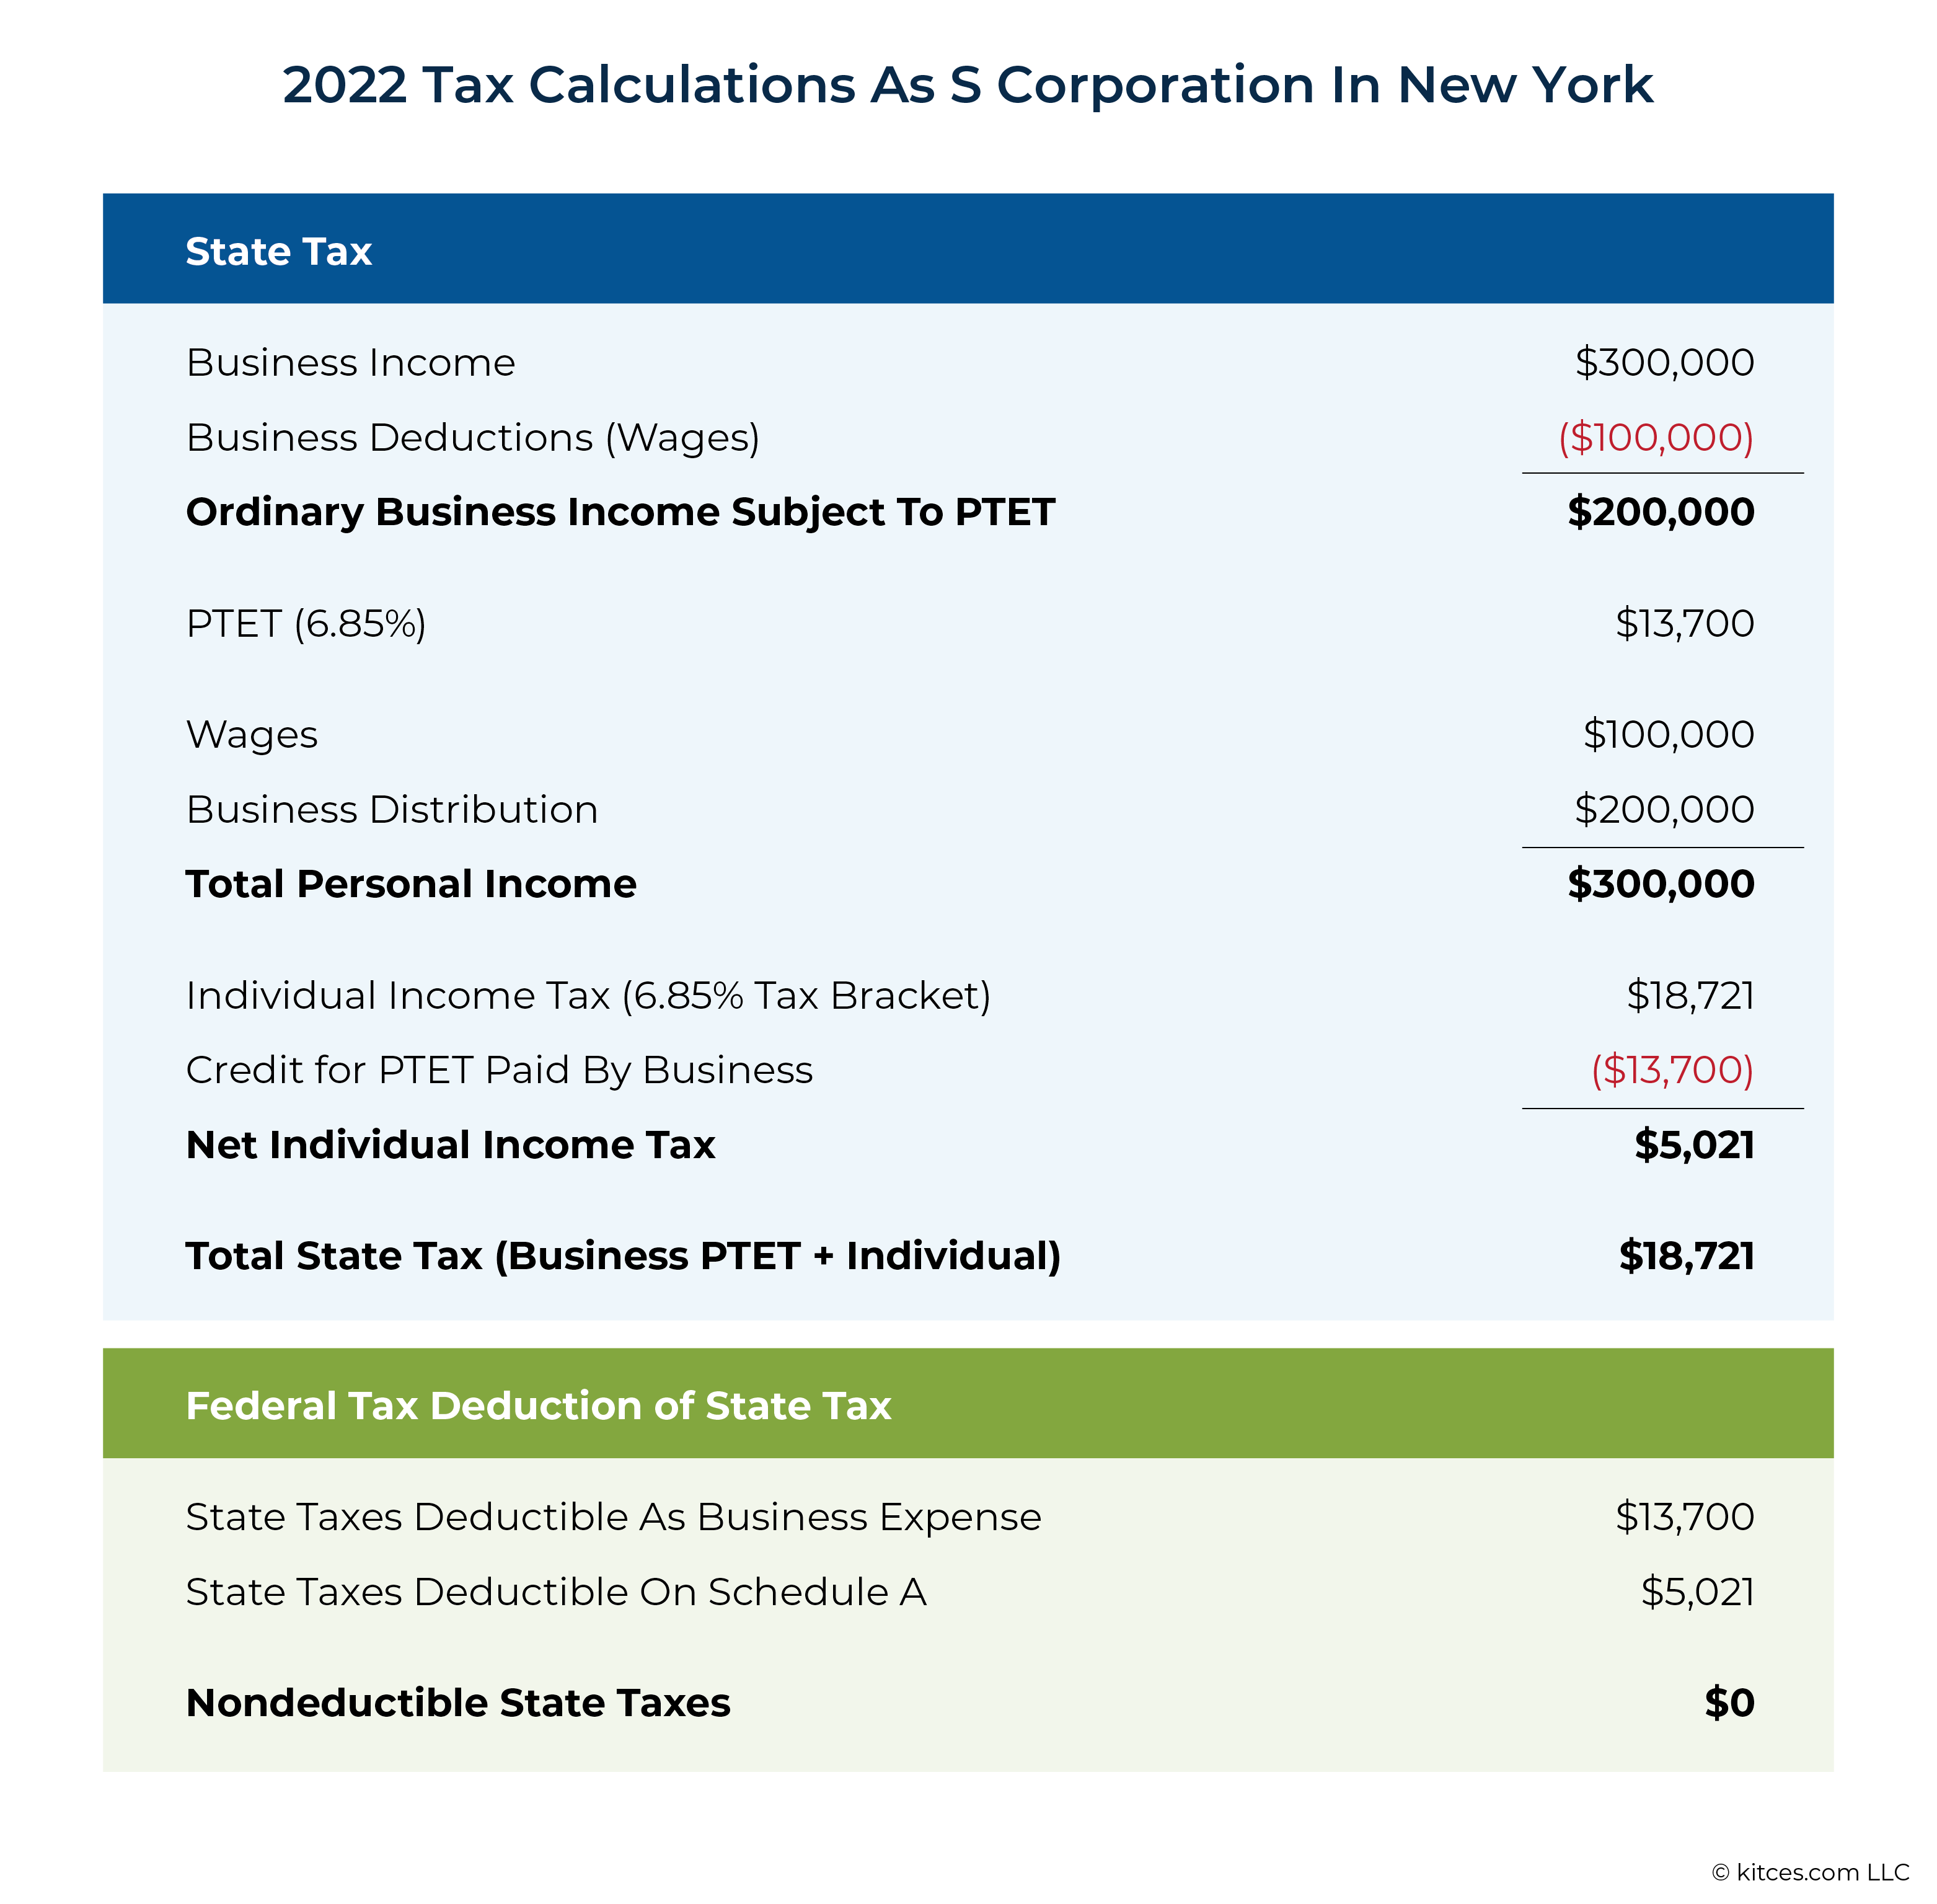 Tax Calculations As S Corporation In New York